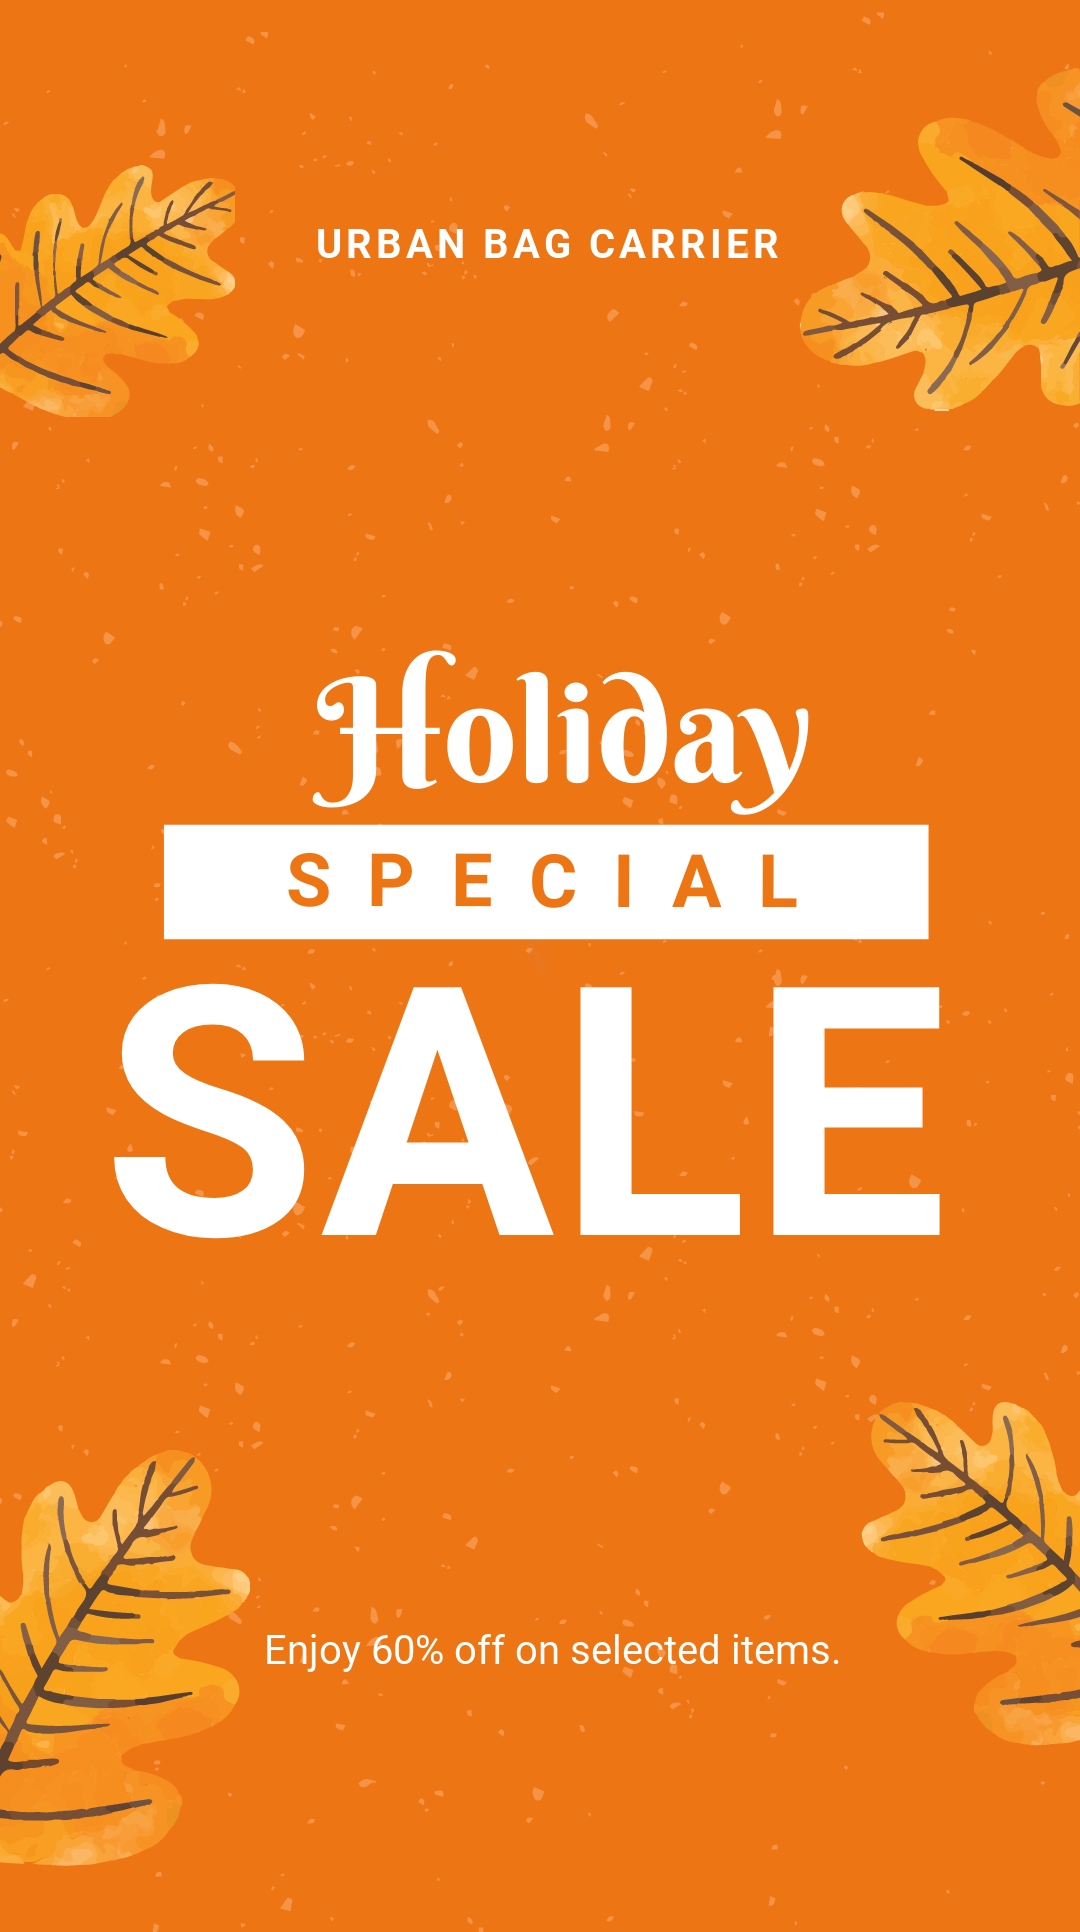 Free Holiday Special Sale Whatsapp Image Template.jpe